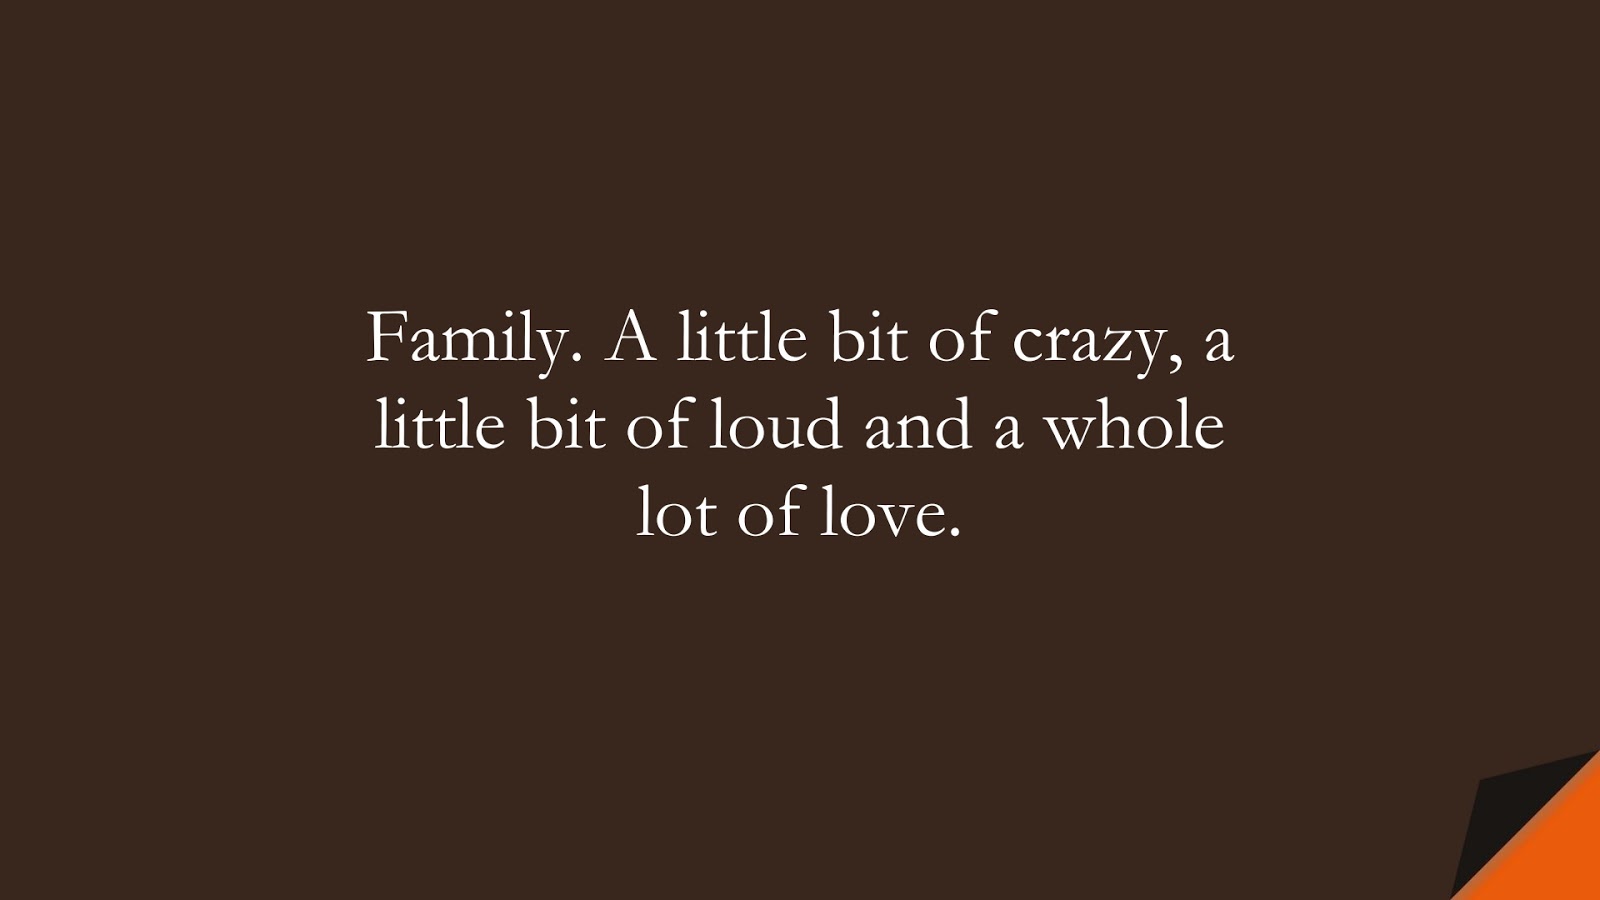 Family. A little bit of crazy, a little bit of loud and a whole lot of love.FALSE